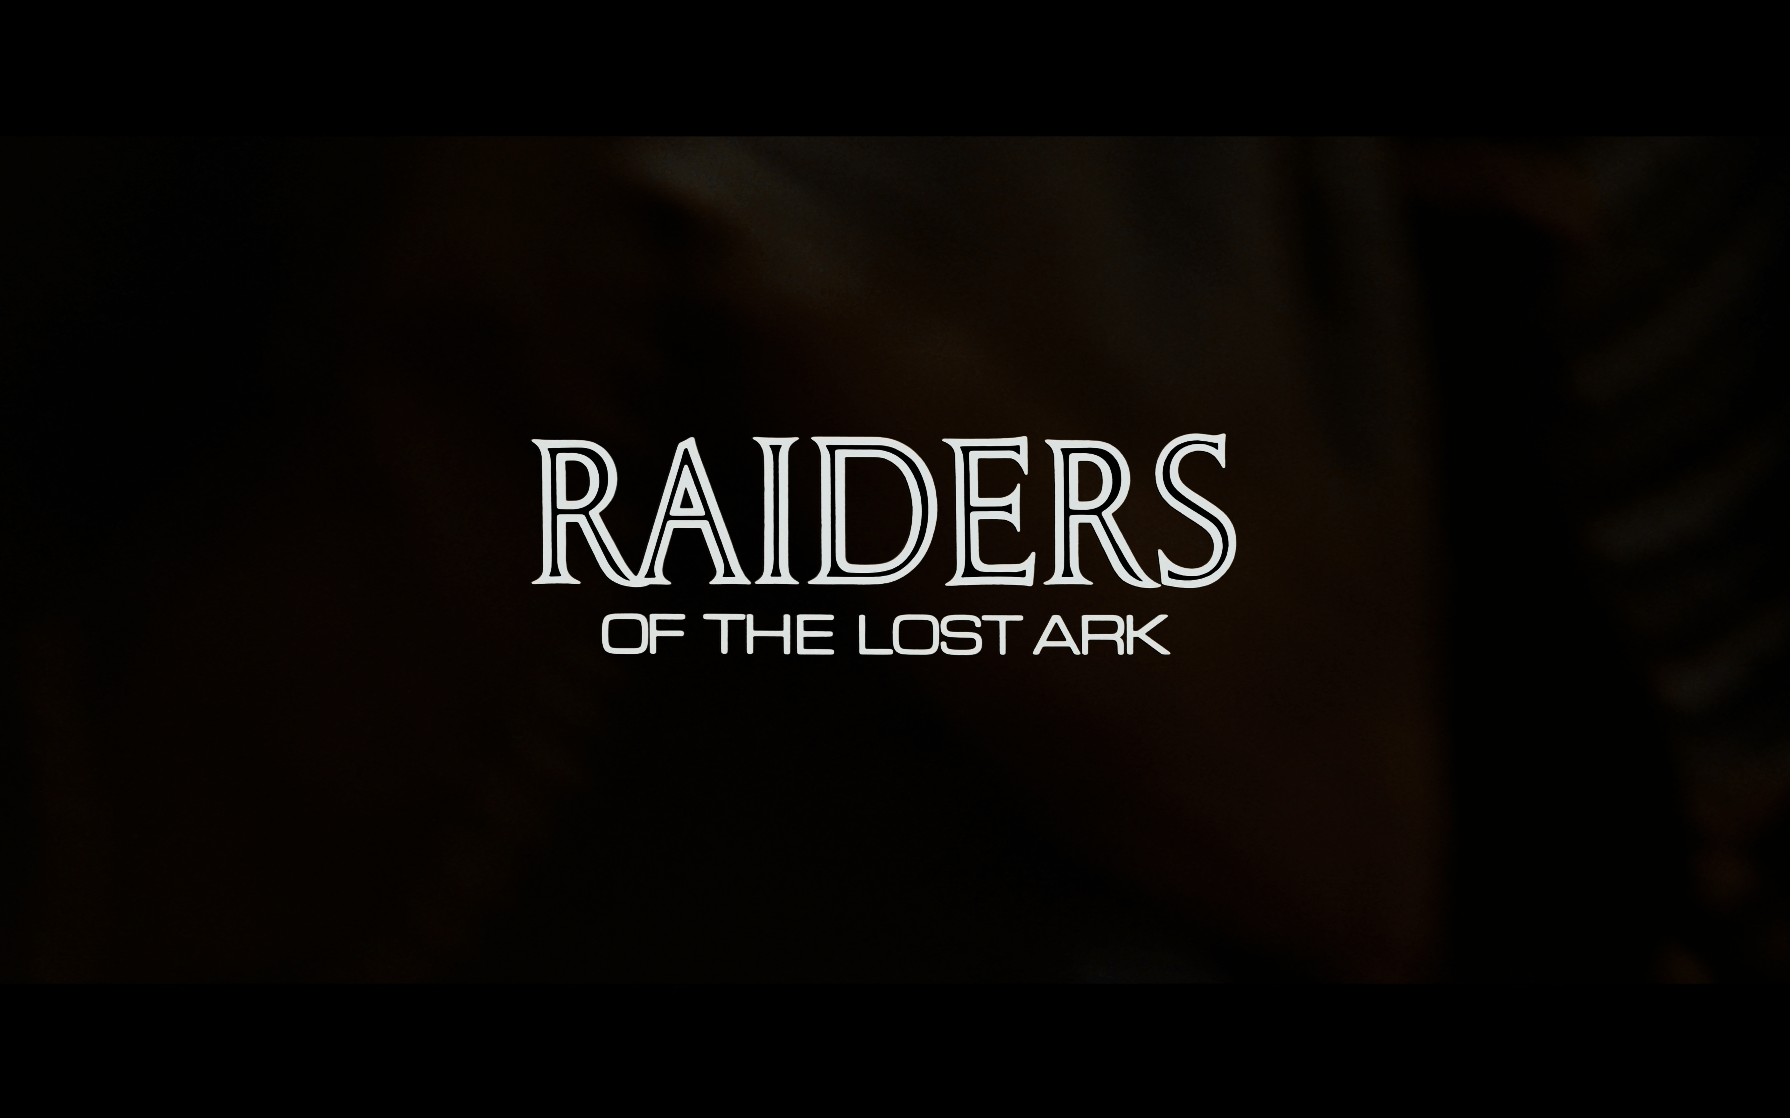 Raiders of the Lost Ark 4K title